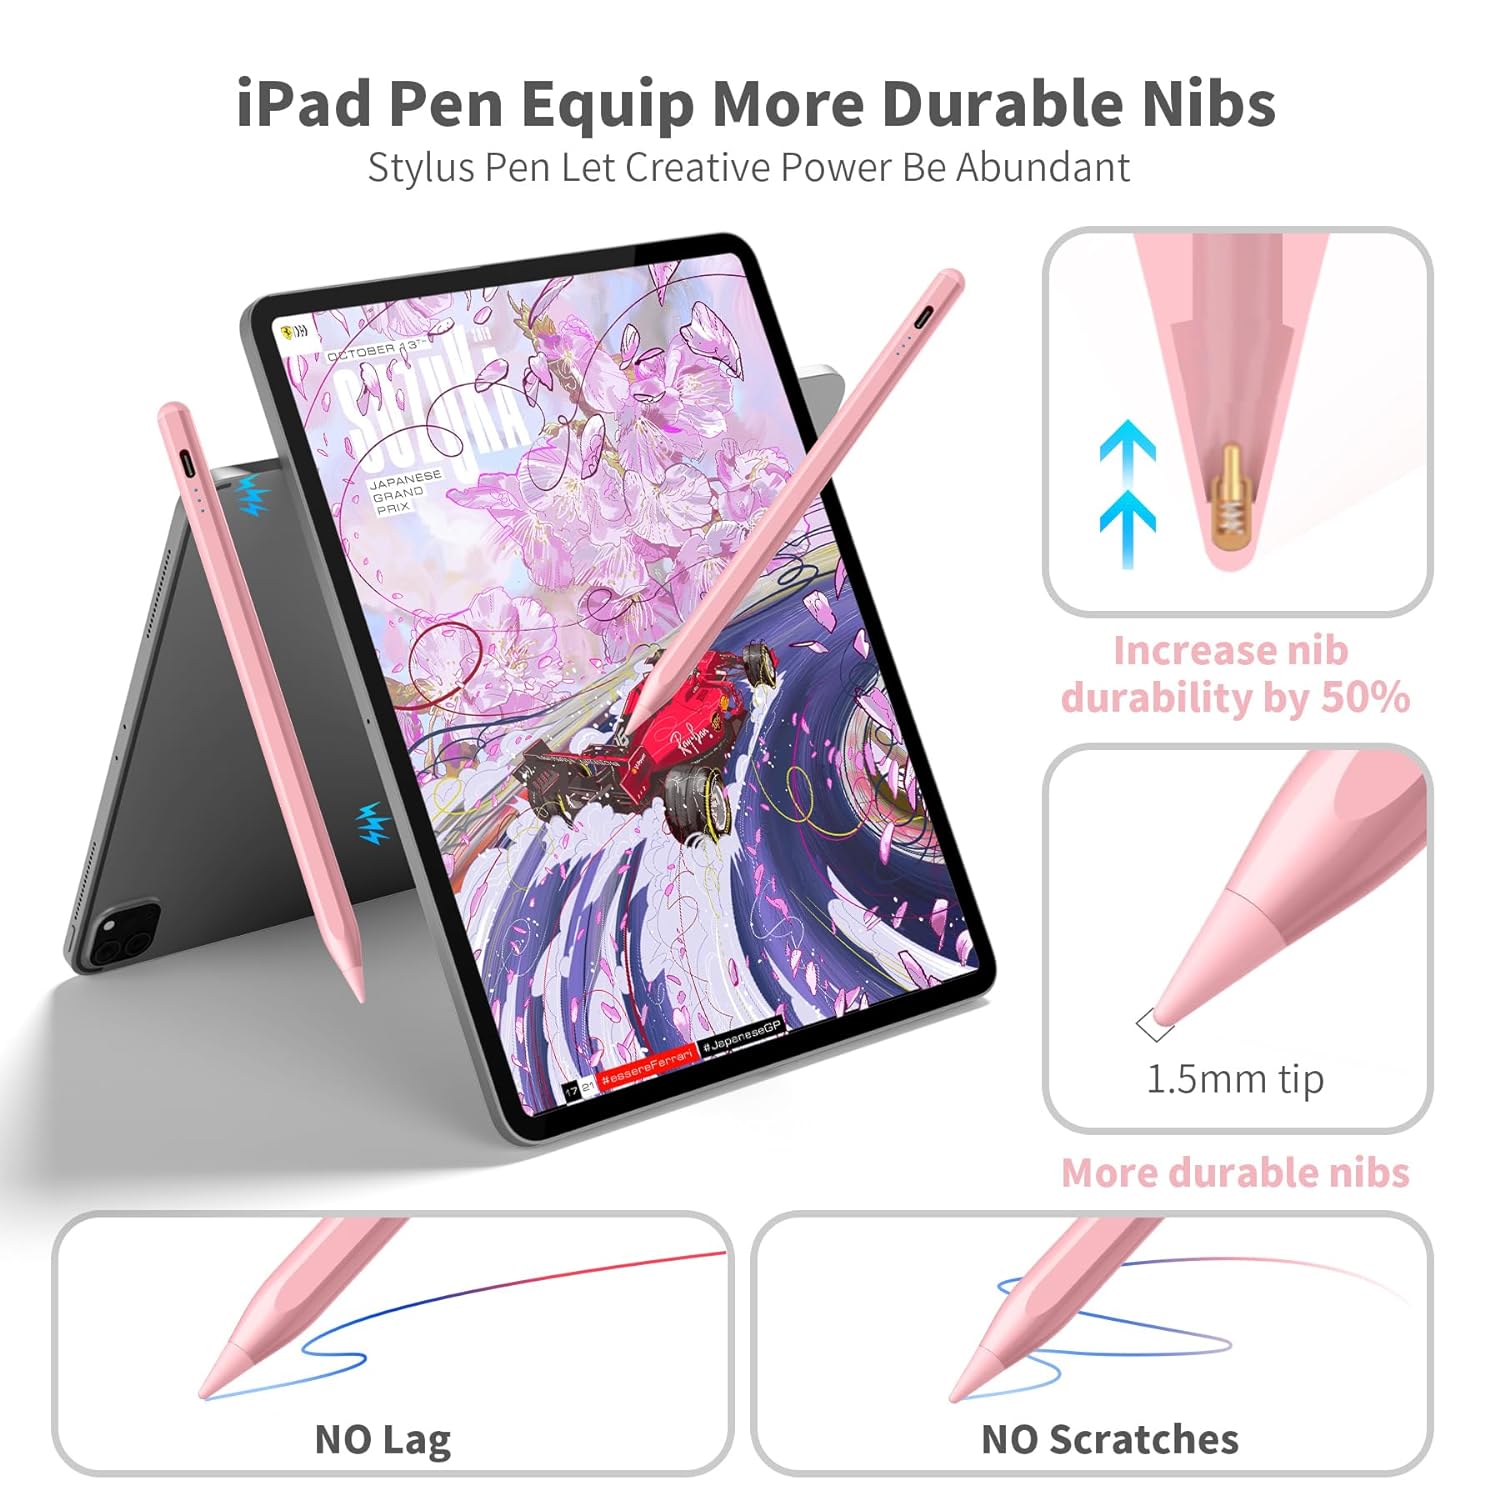 Stylus Pen for iPad Compatible With Apple iPad Pro 11/12.9 inch,iPad Air 5th/4th/3rd,iPad 9th/8th/7th/6th,iPad Mini 5th/6th,for Painting Sketching Doodling,Stylus With Palm Rejection,Tilt,Rechargeable